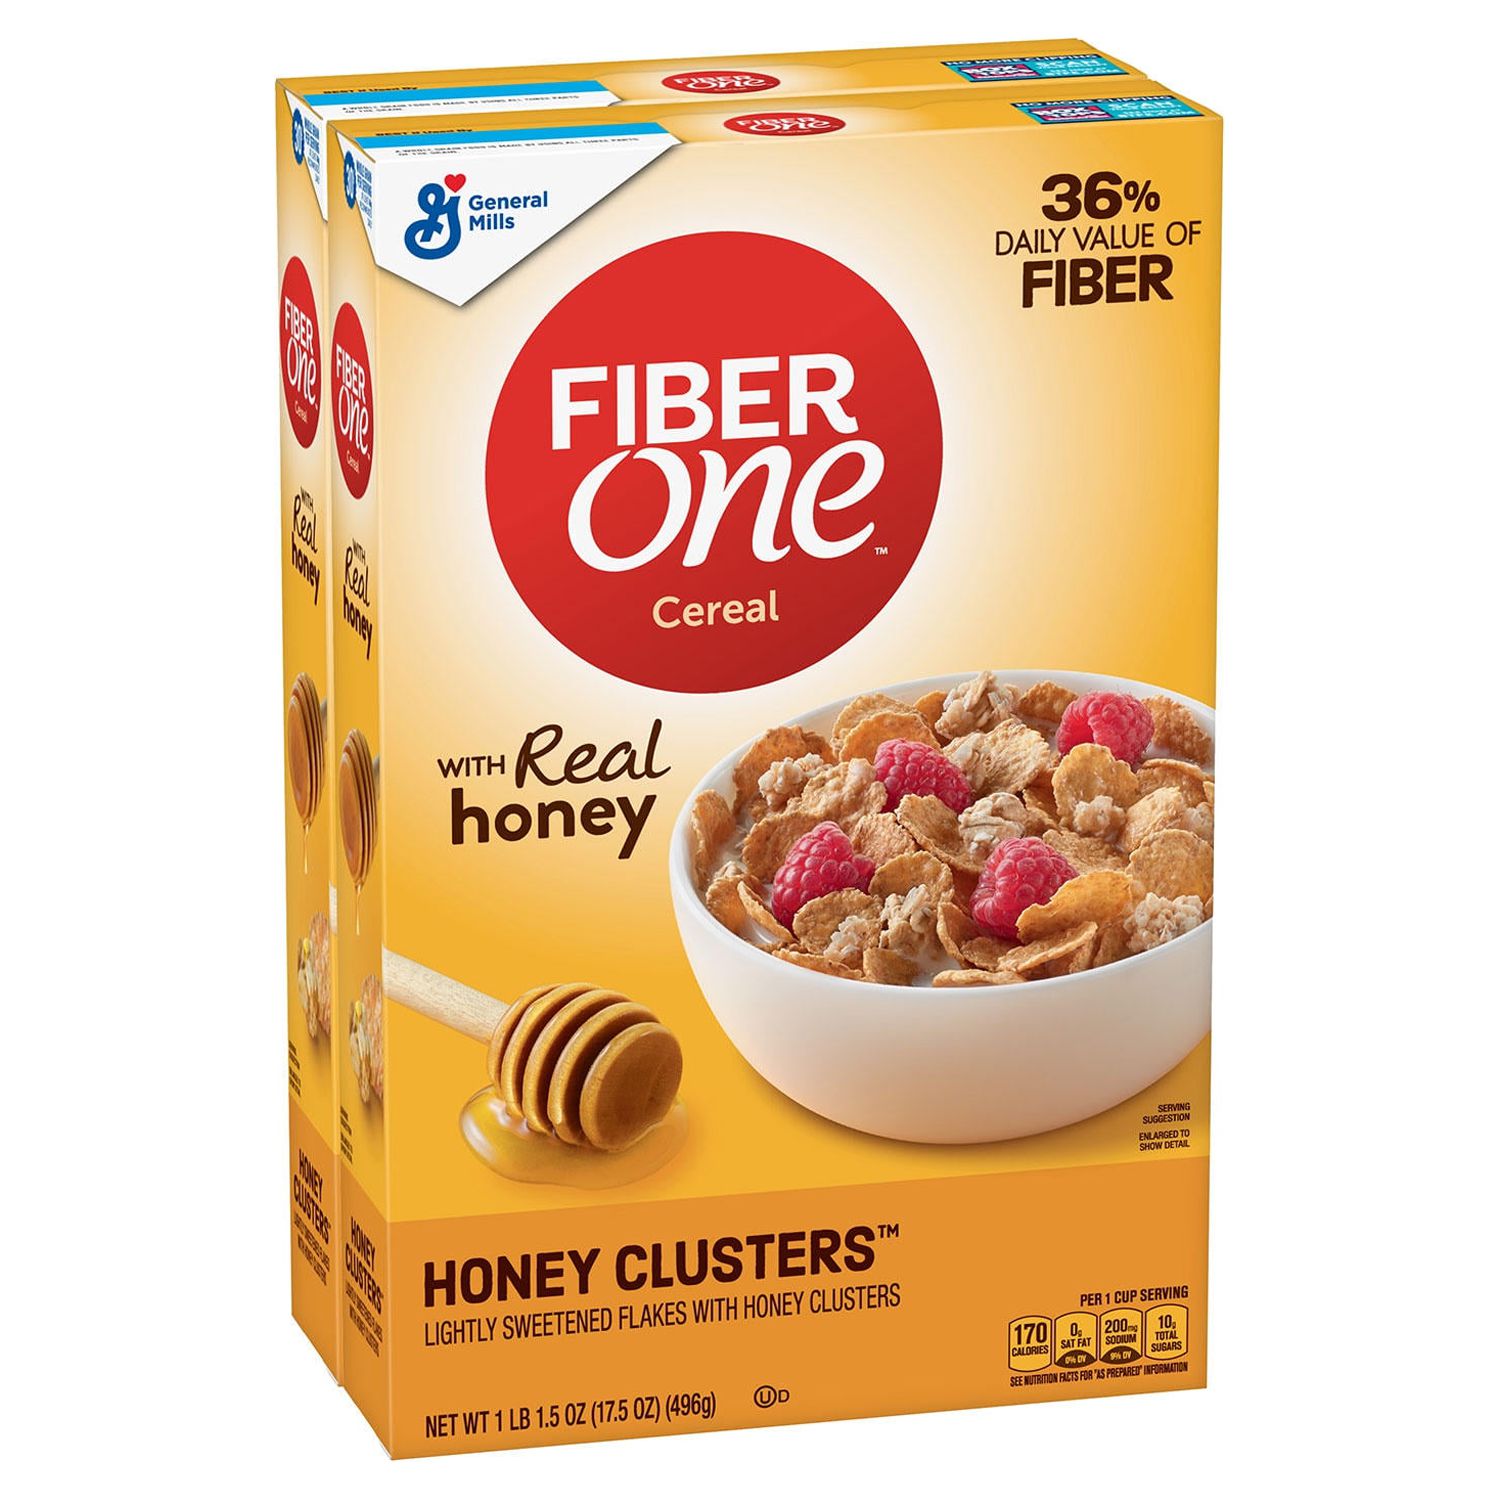 Fiber One Cereal, Honey Clusters (2 pk.) - image 1 of 2